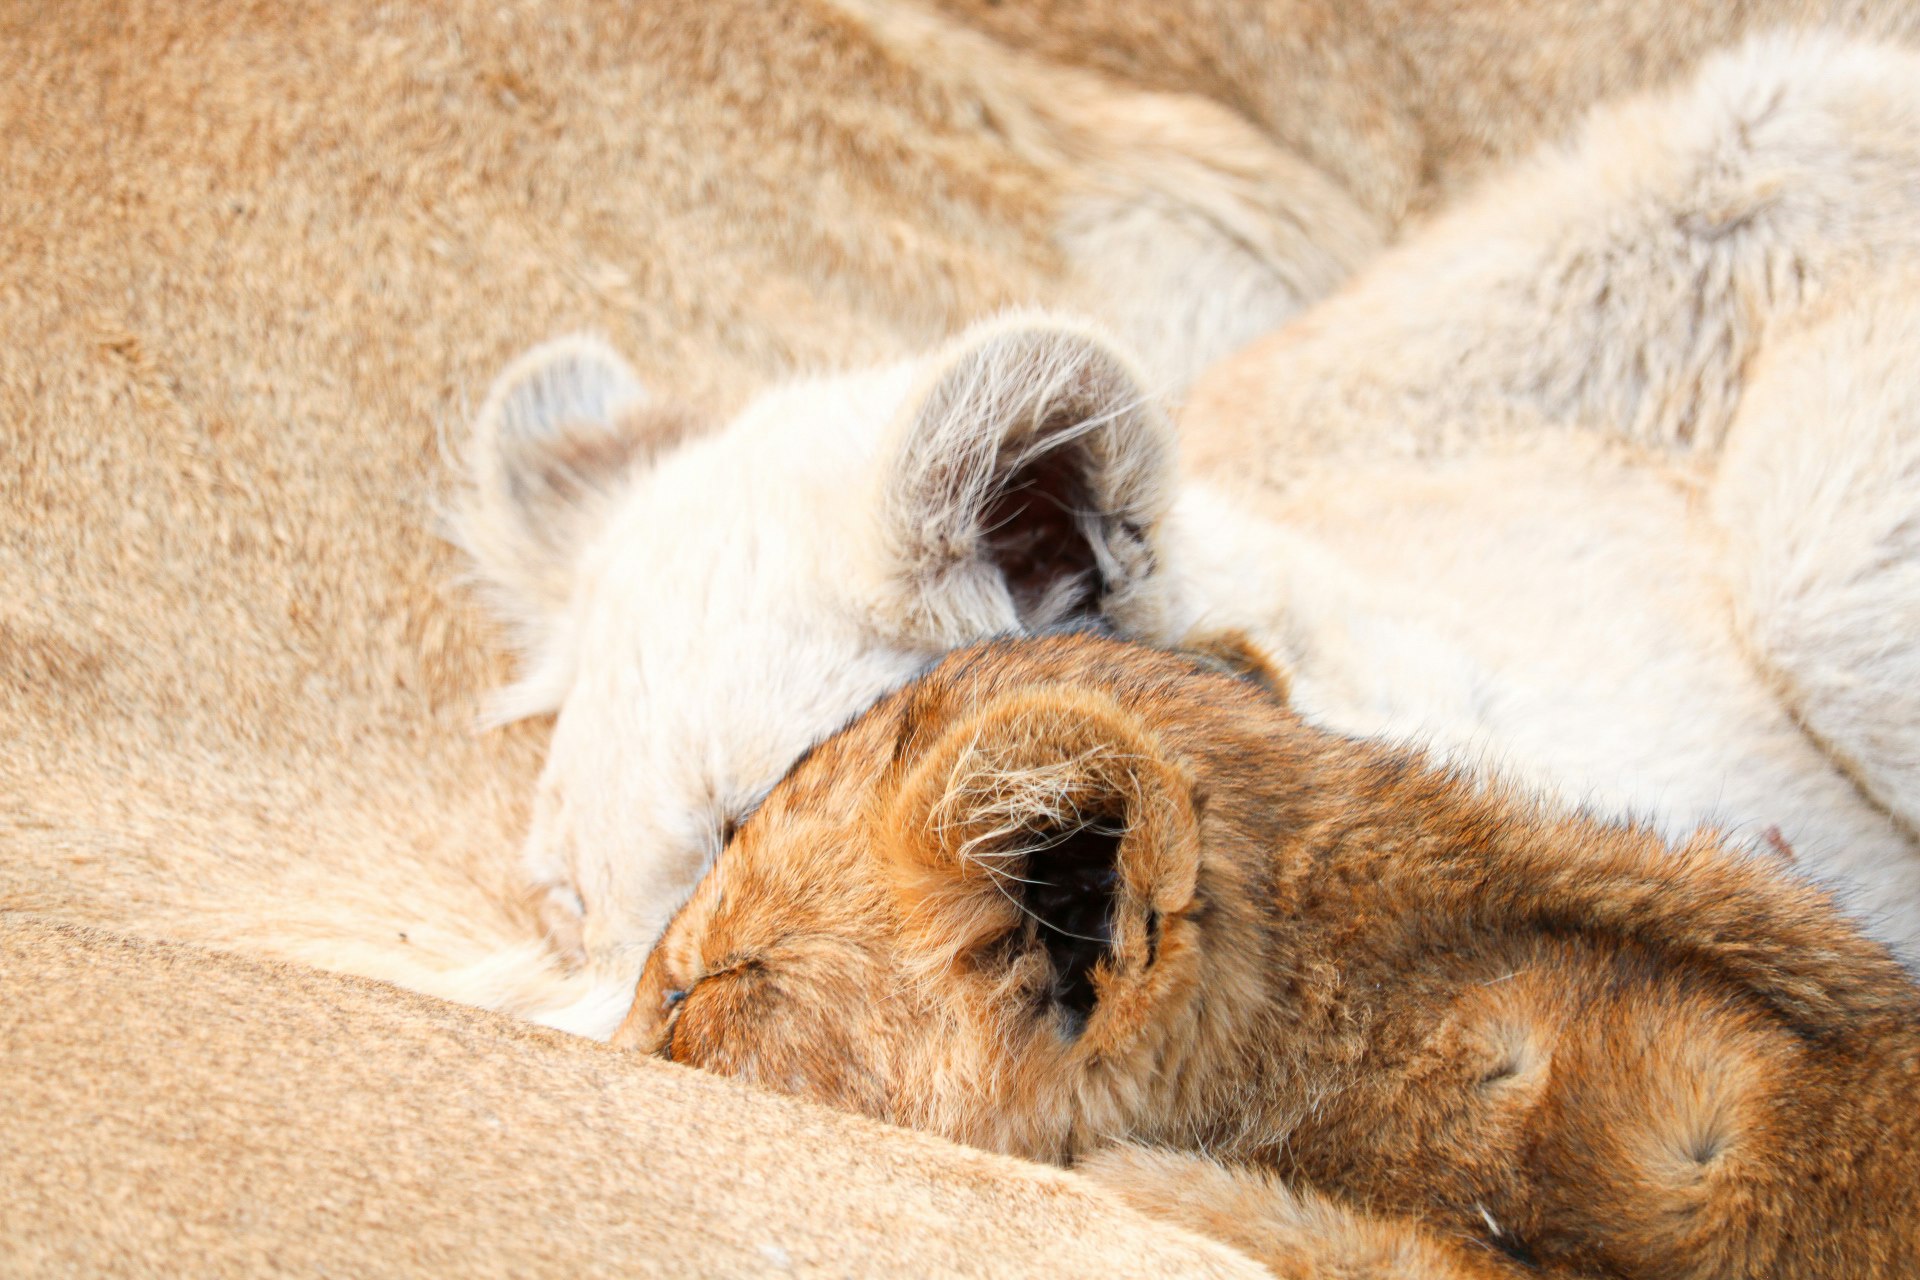 A larger white cub and smaller tawny cub, both with eyes closed, sit with their heads buried in their mother's belly while suckling.